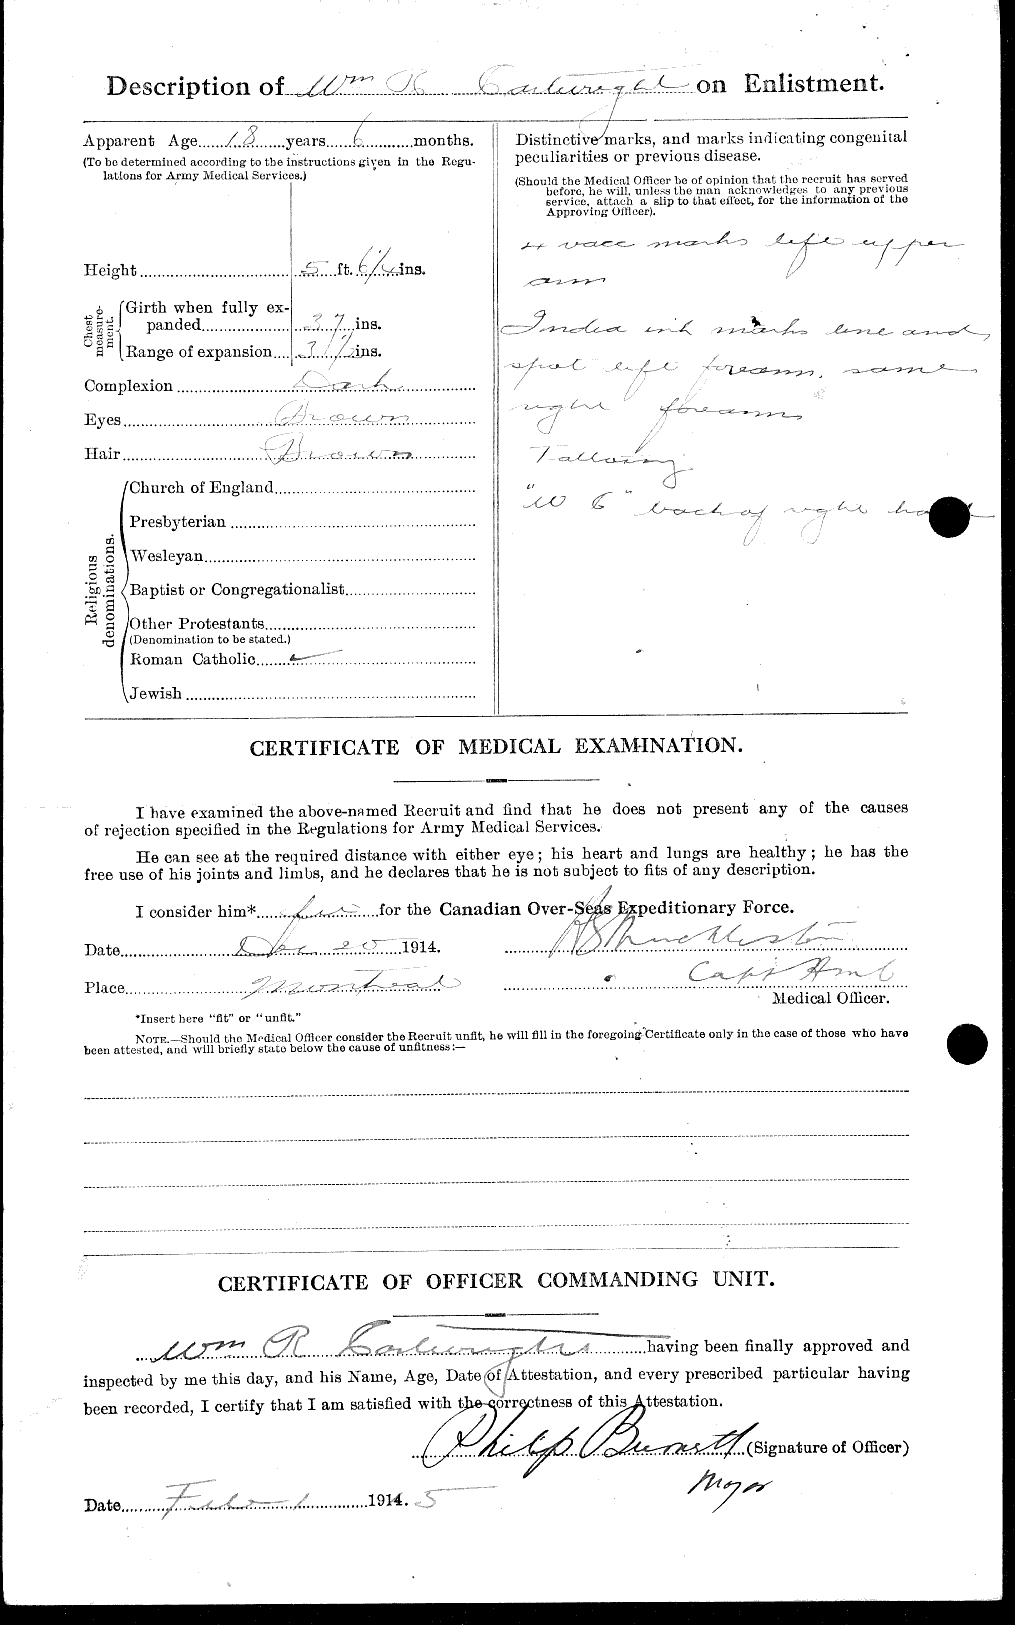 Personnel Records of the First World War - CEF 012555b